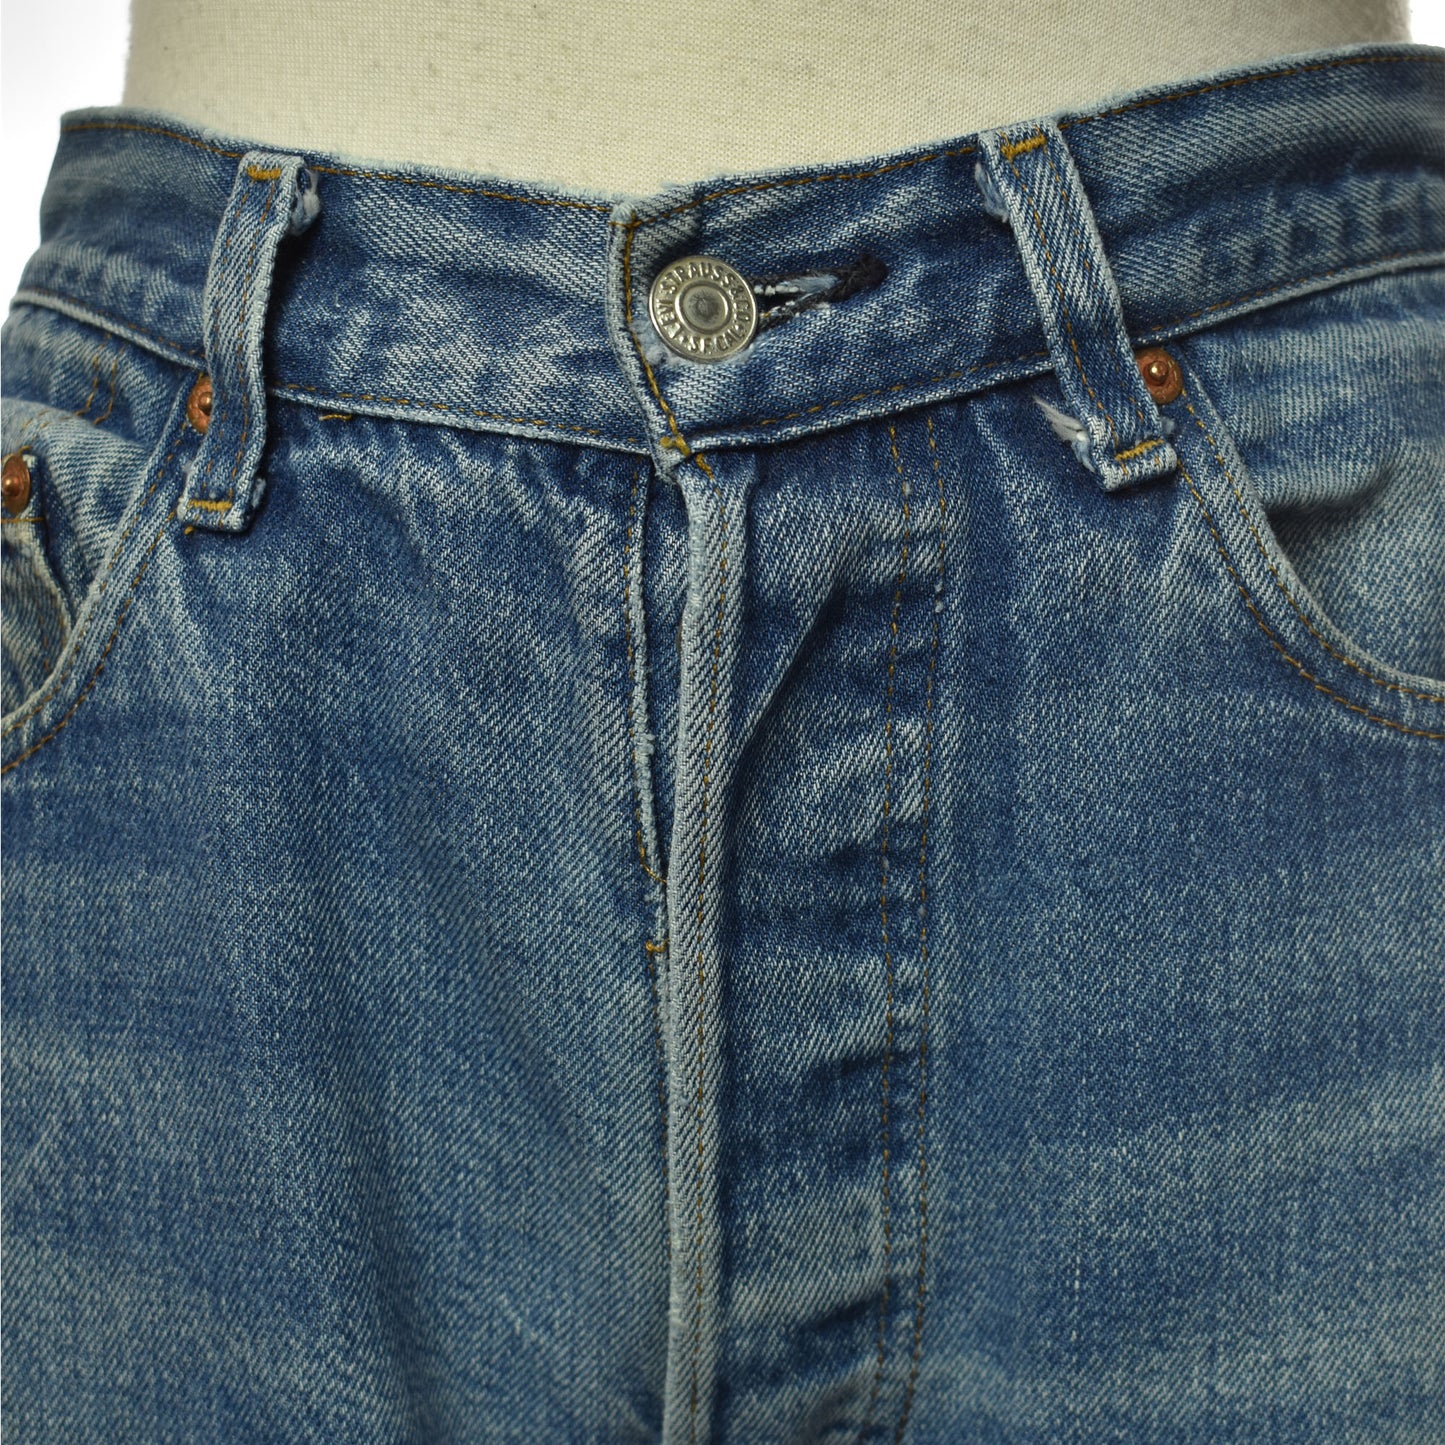 Vintage 80s Levis 1501 0117 Paper Tag Made in USA Button Fly Jeans 32" Waist